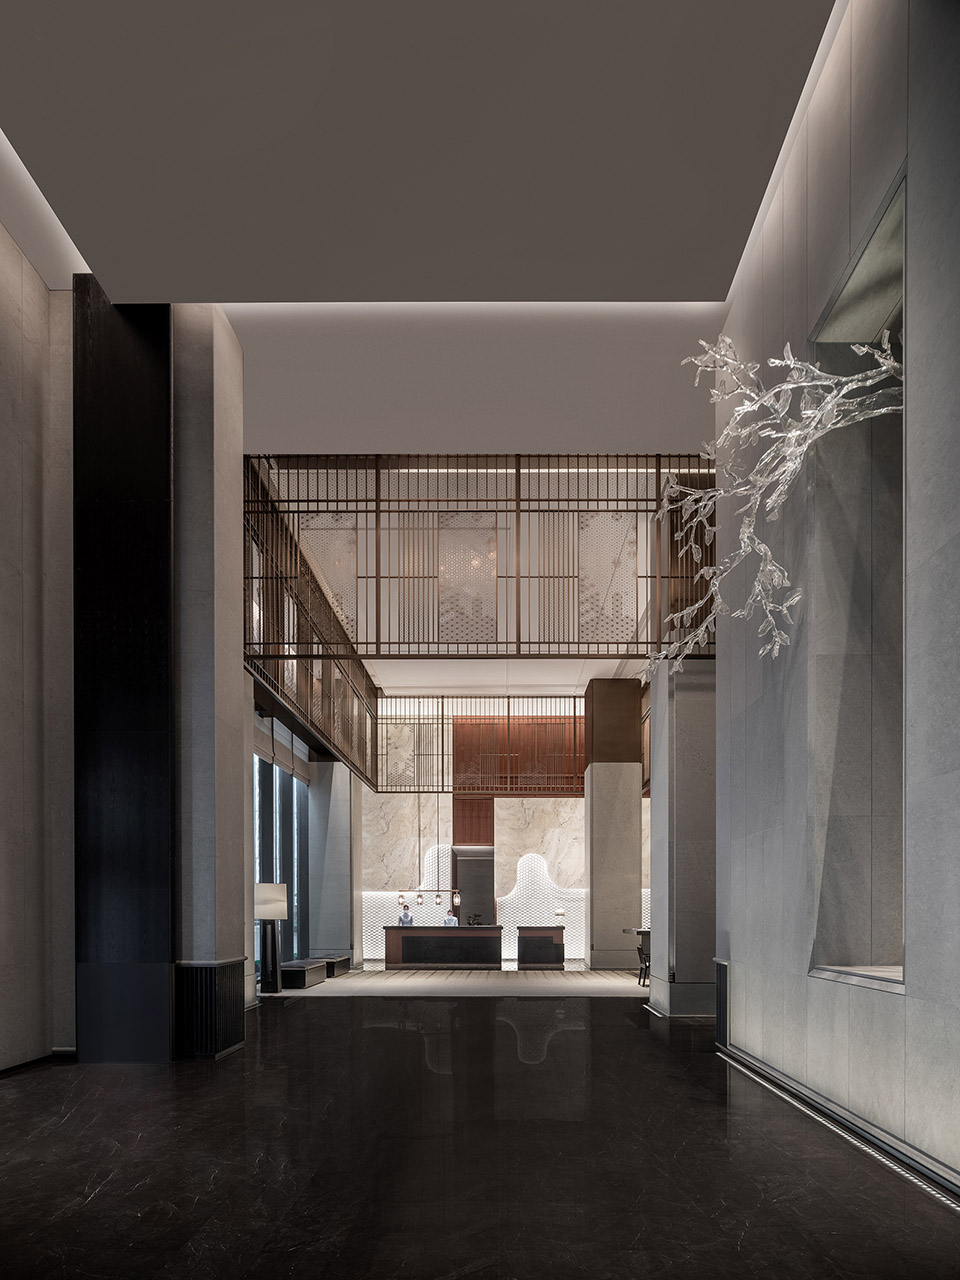 Design of lobby & front desk of InterContinental Hotel